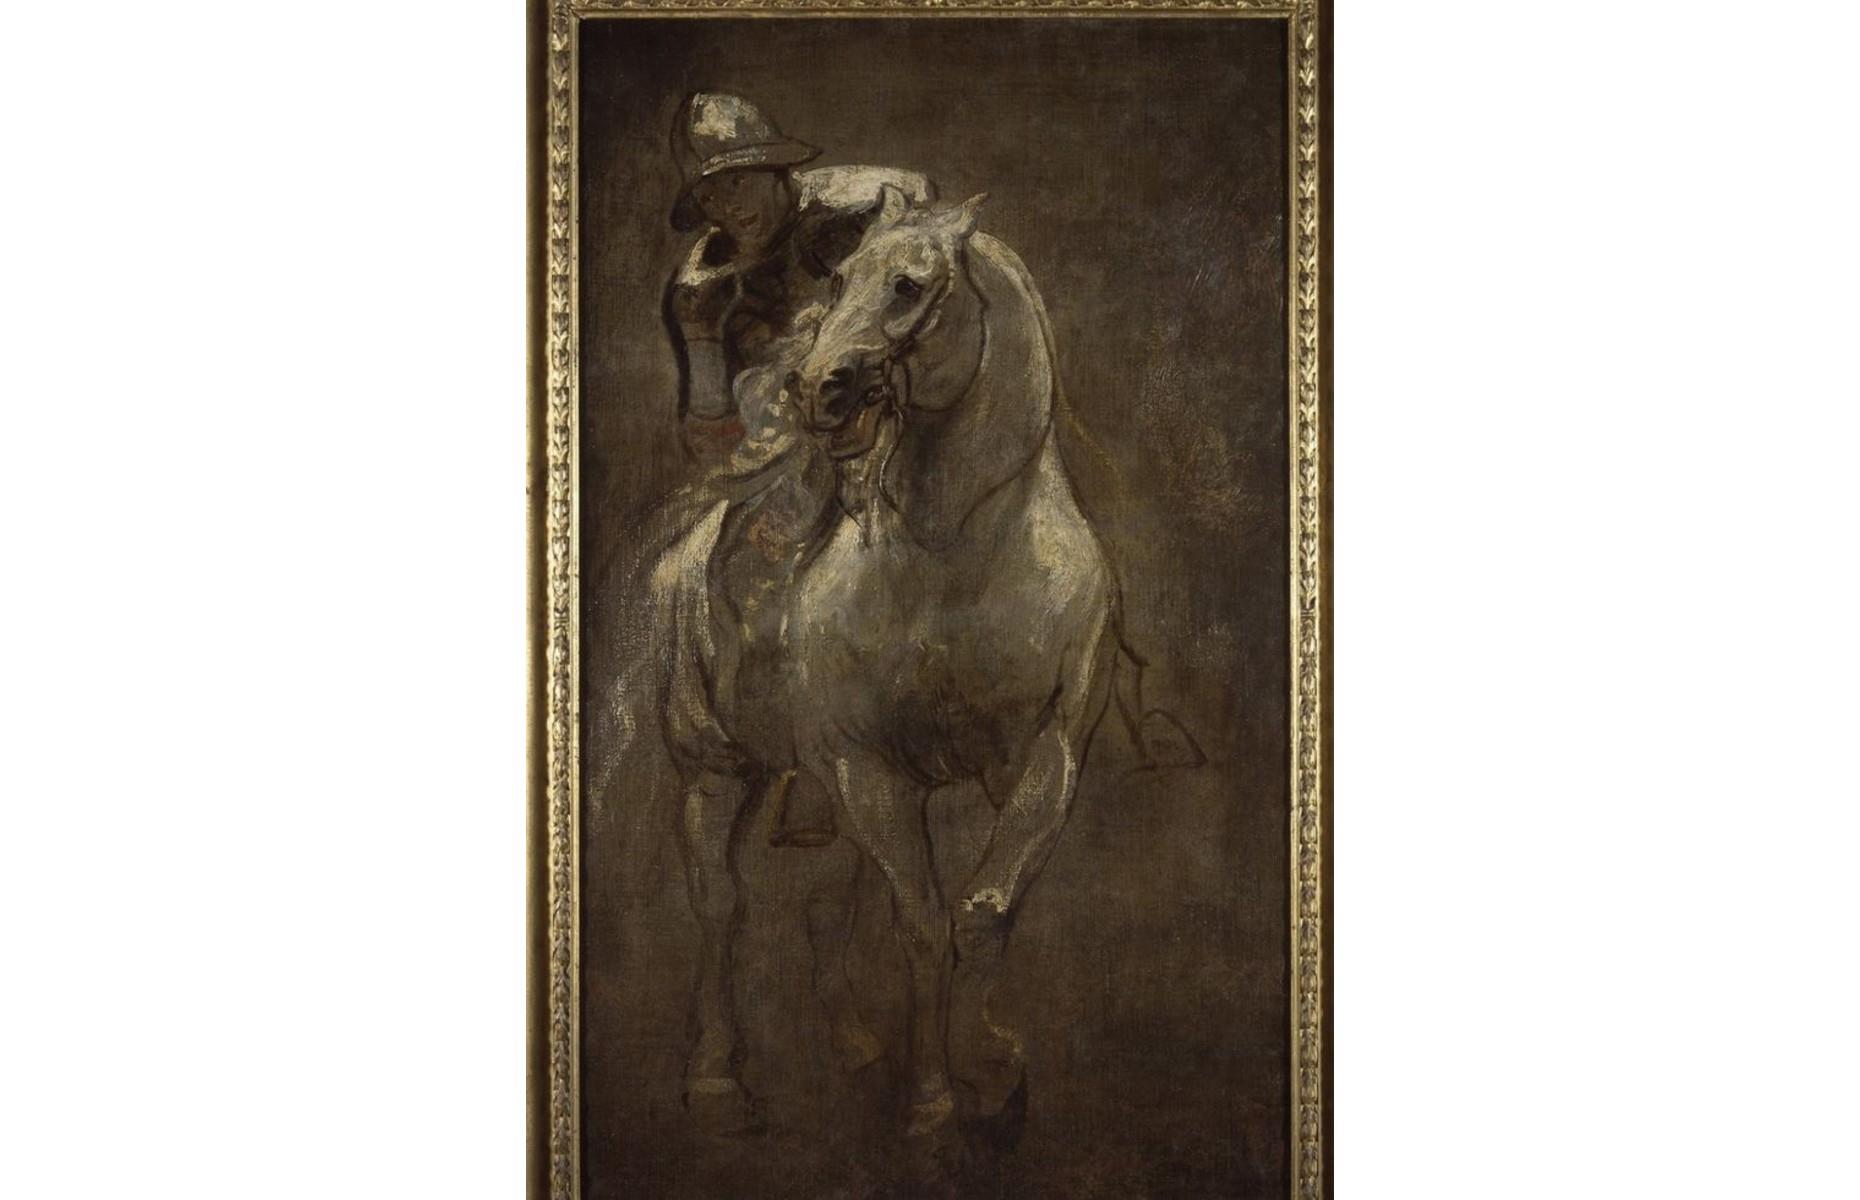 Van Dyck’s A Soldier on Horseback and two other artworks